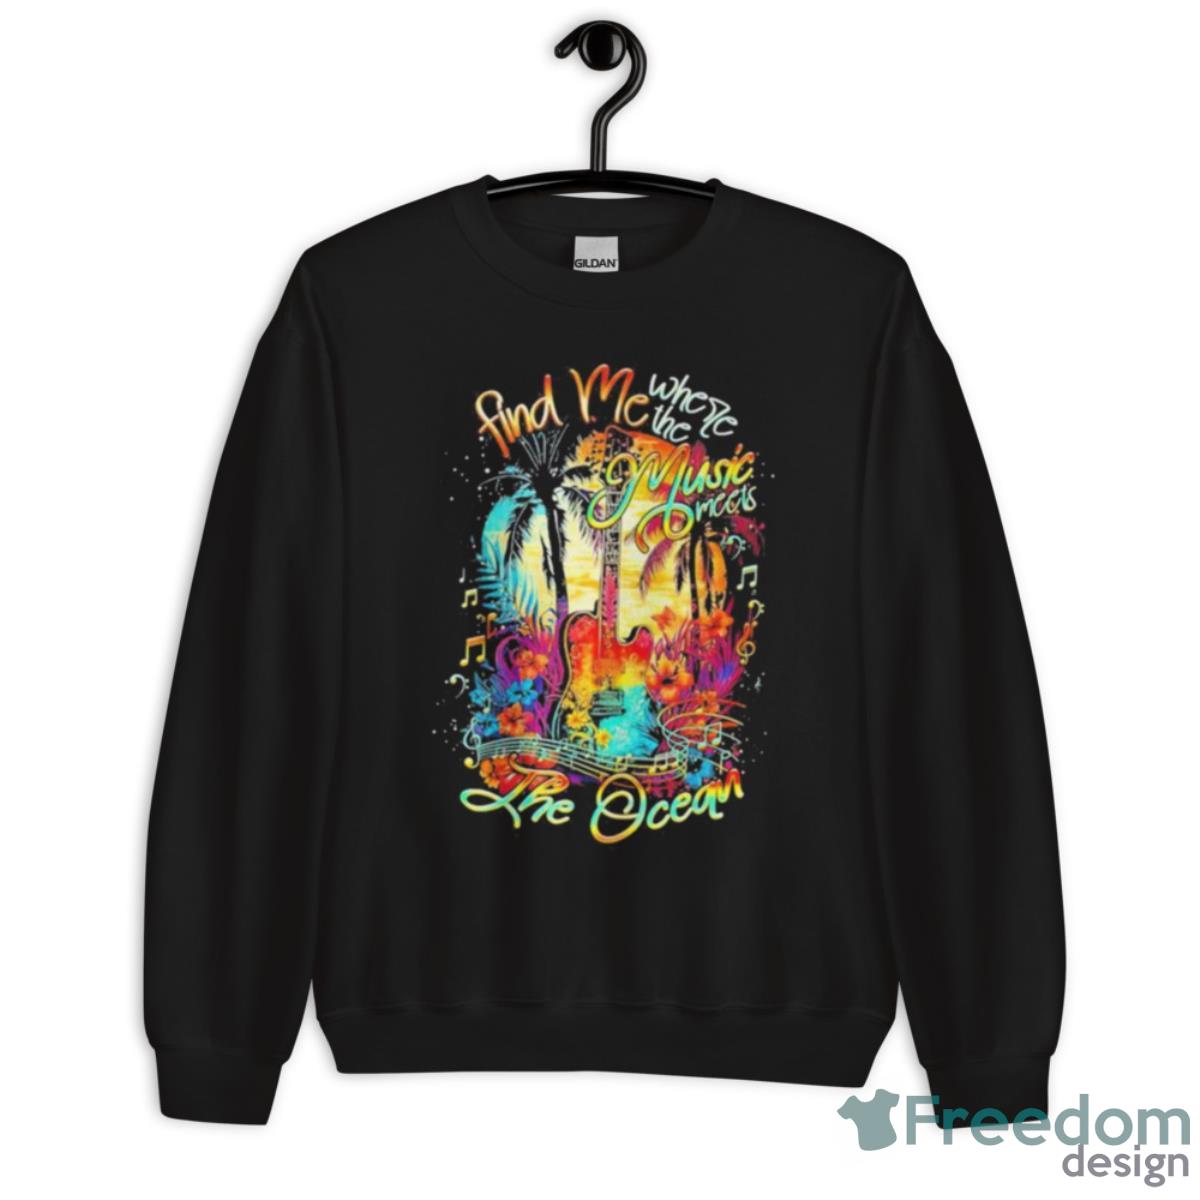 Find Me Where The Music Meets The Ocean Shirt